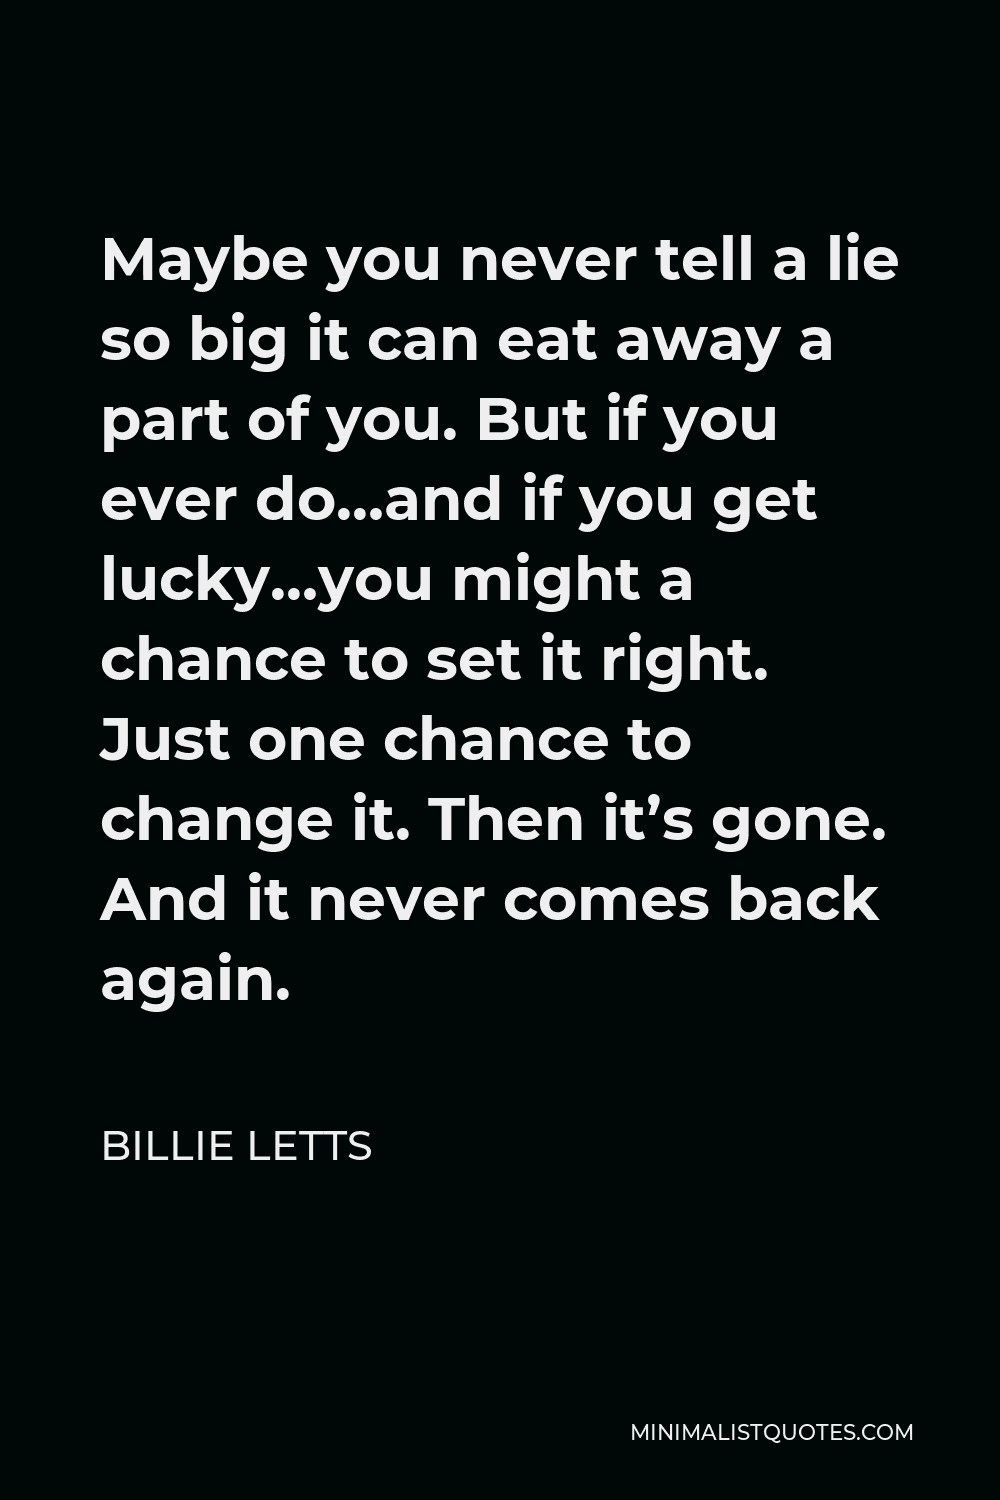 Billie Letts Quote - Maybe you never tell a lie so big it can eat away a part of you. But if you ever do…and if you get lucky…you might a chance to set it right. Just one chance to change it. Then it’s gone. And it never comes back again.